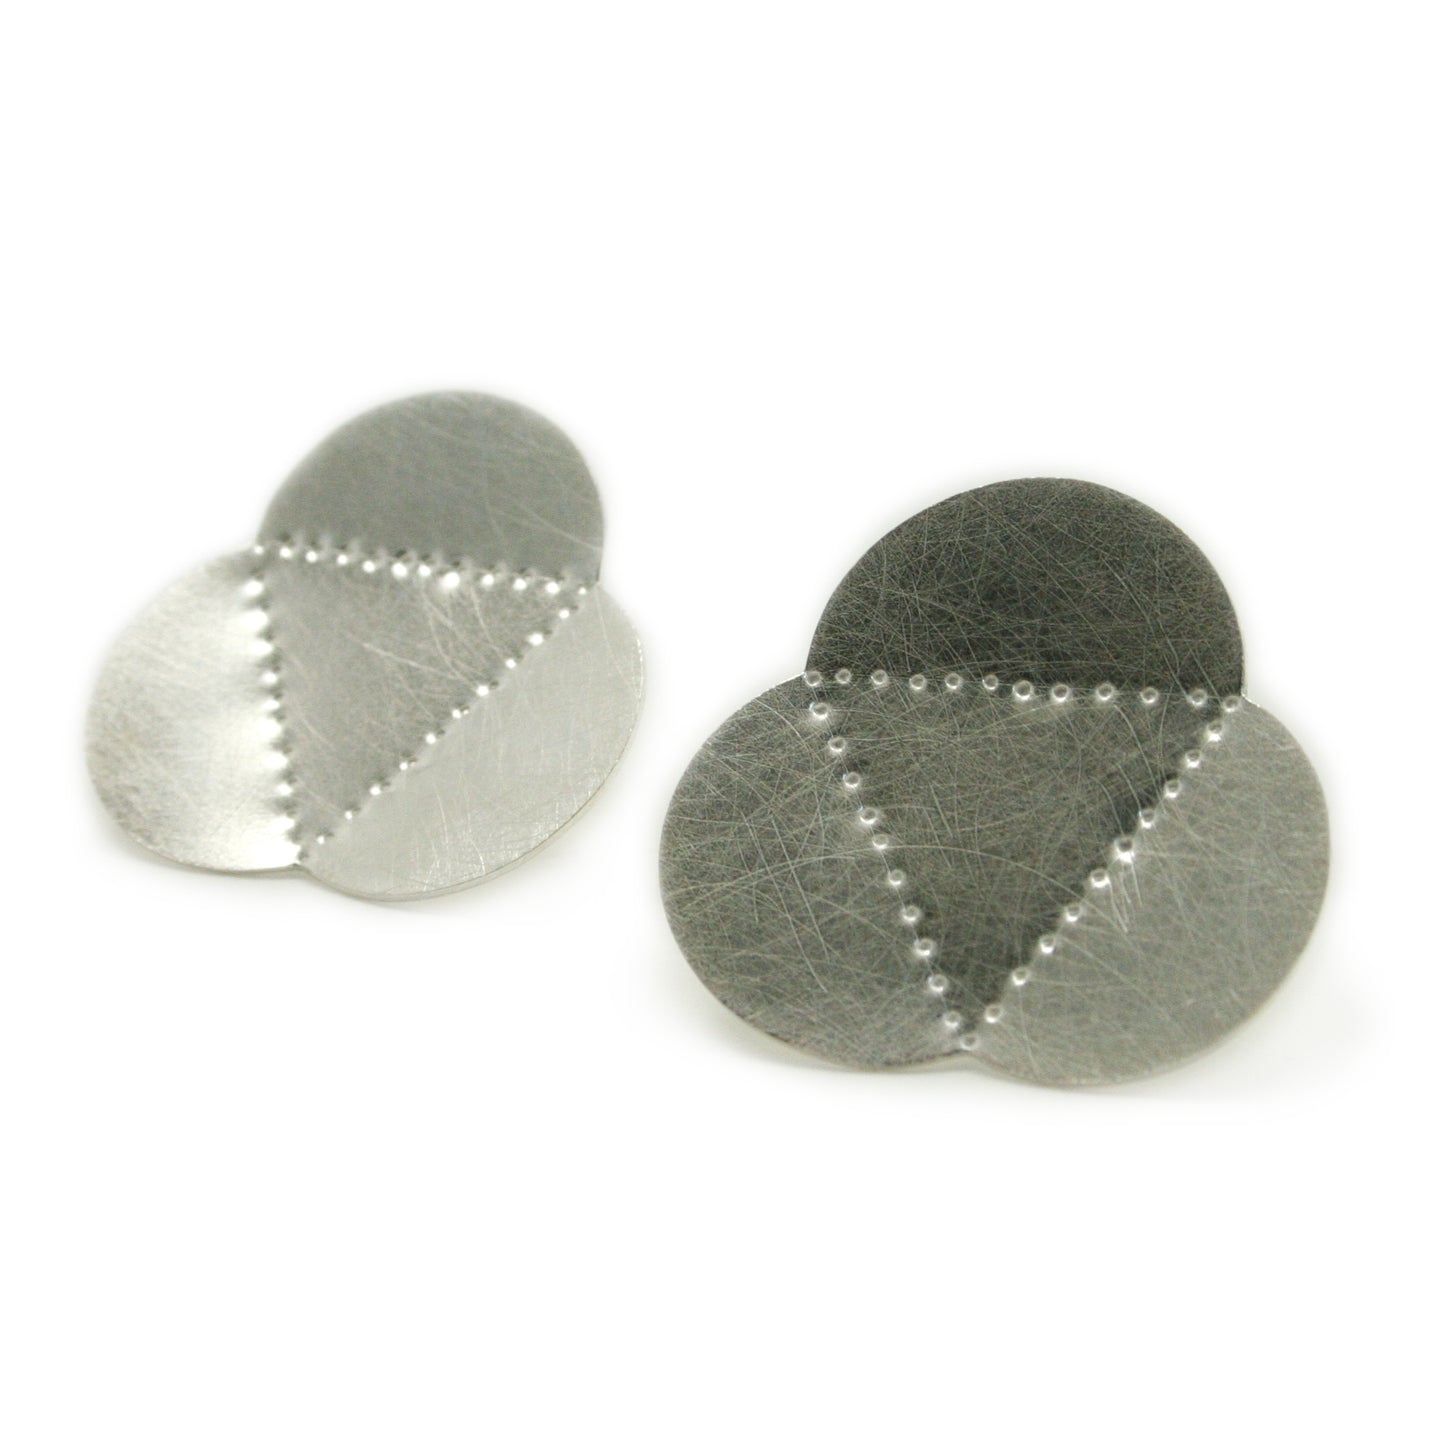 Scalloped & Faceted EARRINGS- Tri Fold Posts